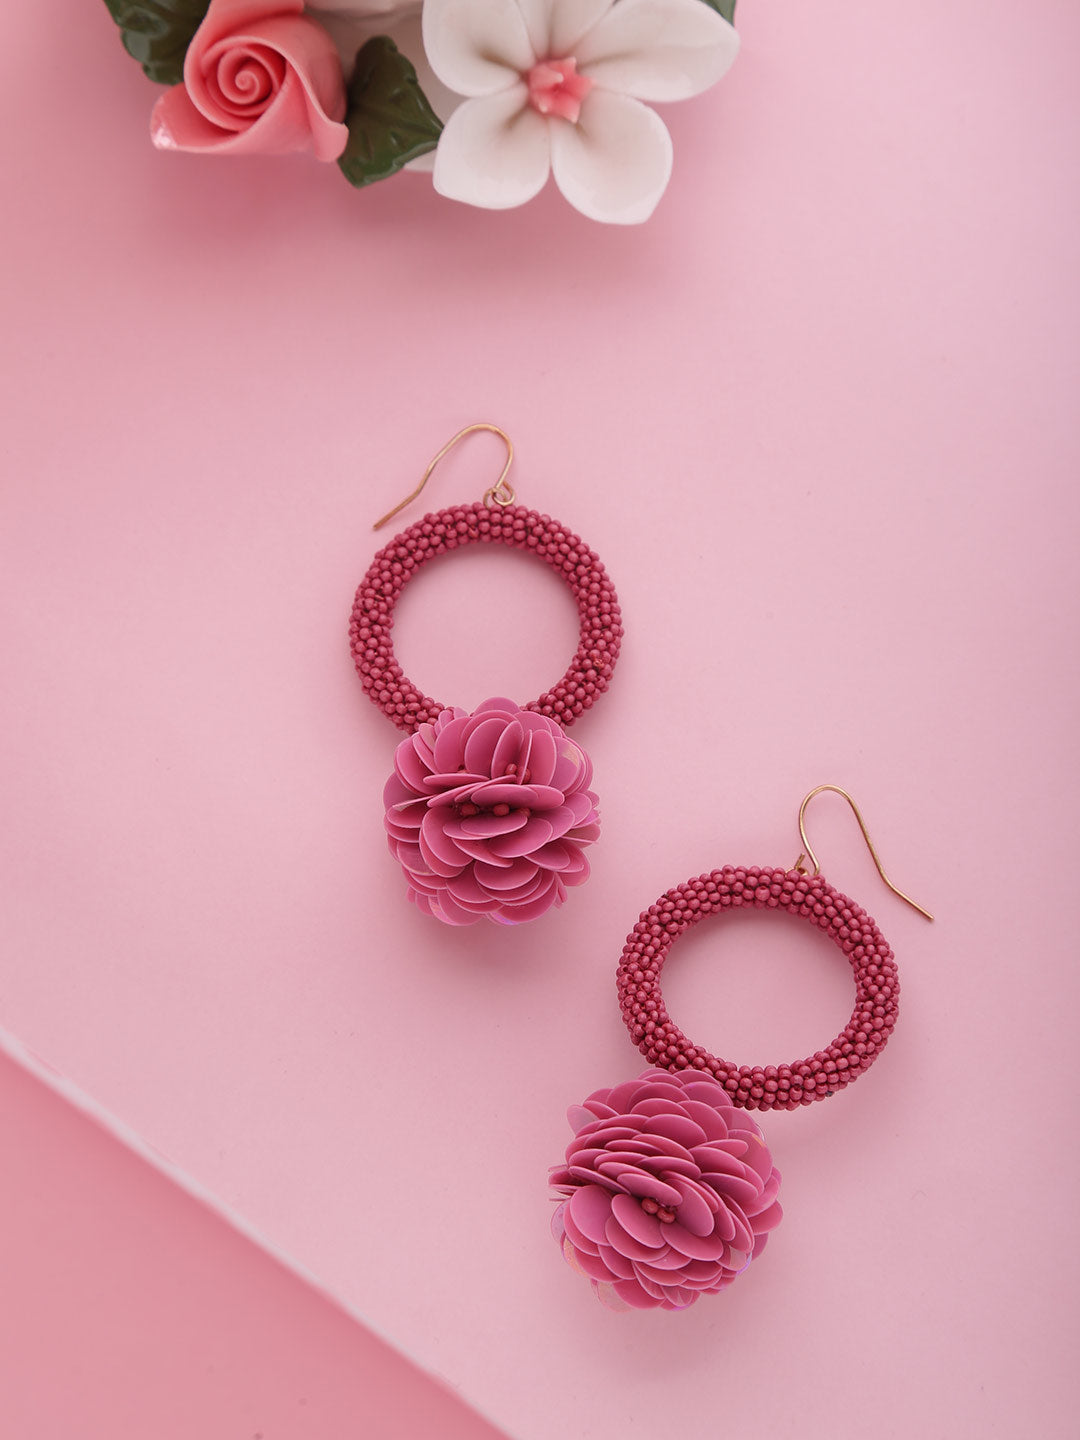 Red Flower Earrings for Women Statement Hanging Pendientes Dangling Fashion  Jewelry  China Creative Earrings and Earrings for Women price   MadeinChinacom